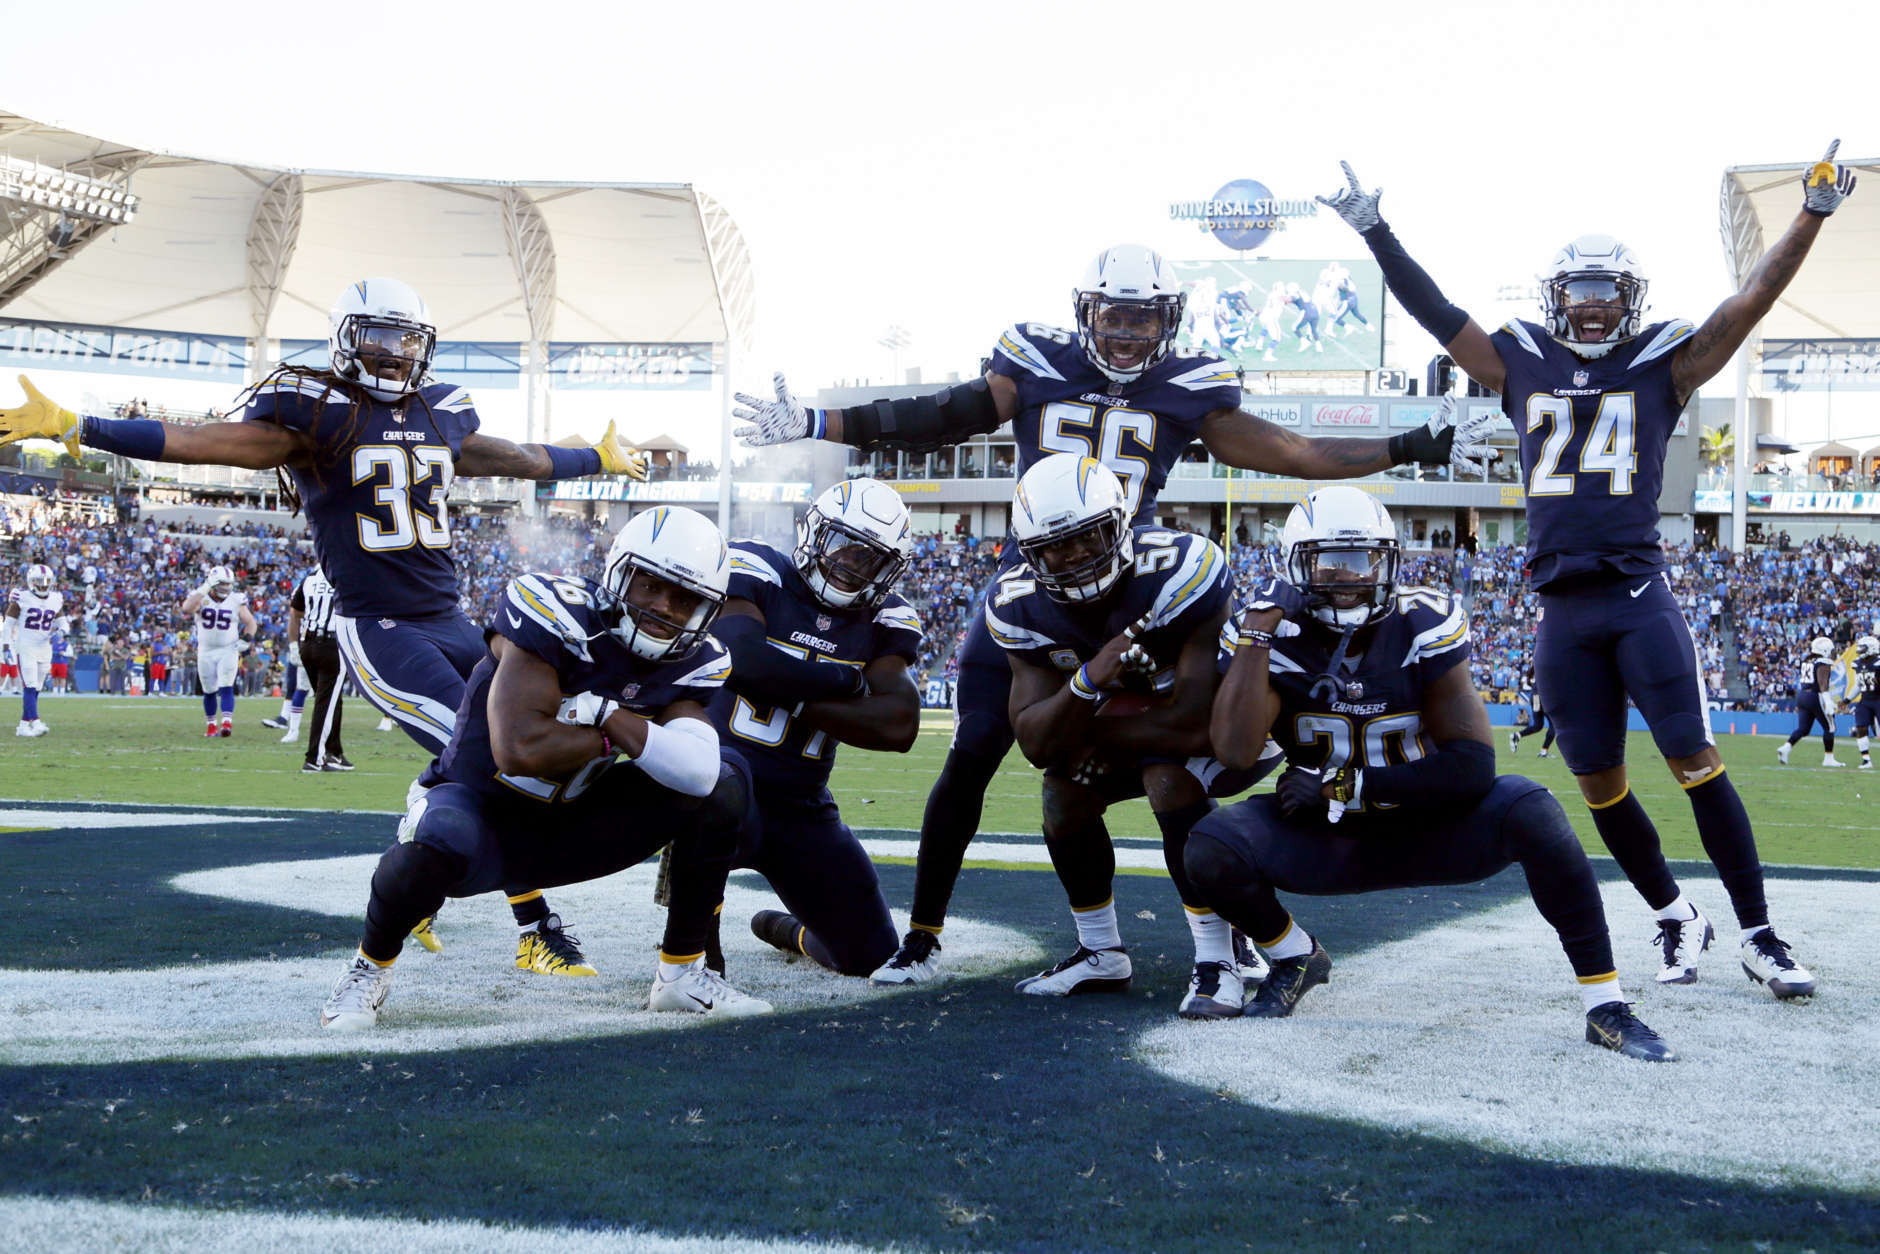 CARSON, CA - NOVEMBER 19: The Los Angeles Chargers defense celebrate after an interception during the NFL game against the Buffalo Bills at the StubHub Center on November 19, 2017 in Carson, California. (Photo by Jeff Gross/Getty Images)